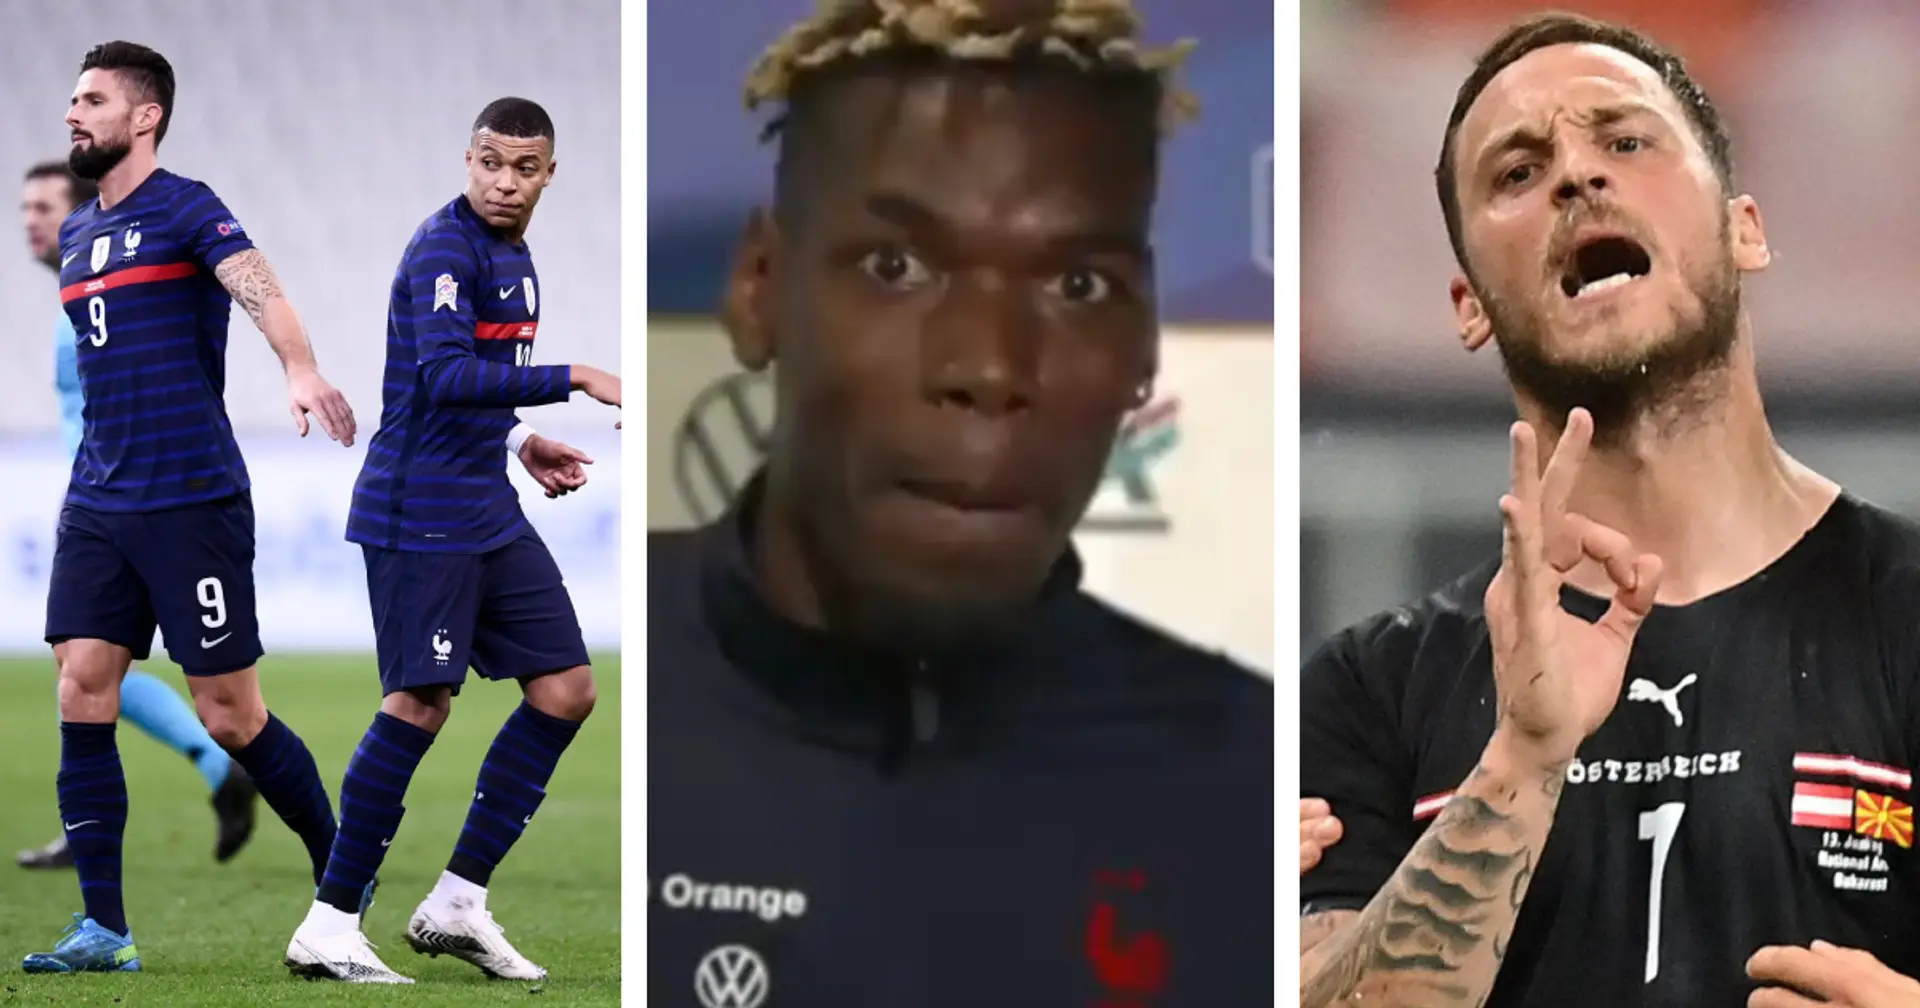 Pogba downplays Mbappe-Giroud spat, Arnautovic suspended & more: 7 big things in world football you can't miss